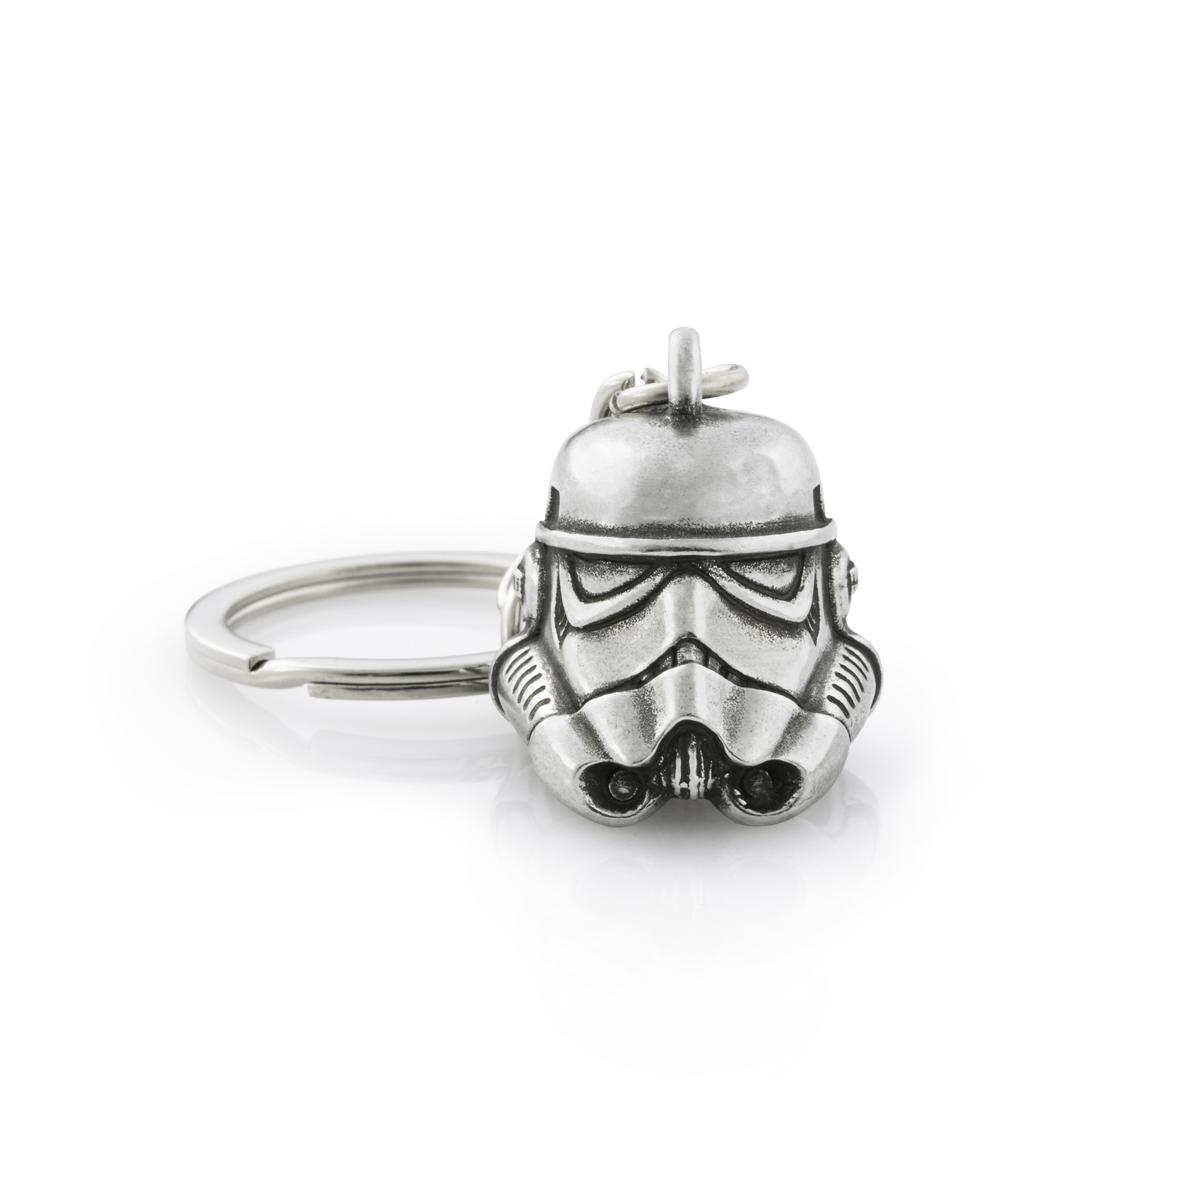 Imperial Stormtrooper Keychain